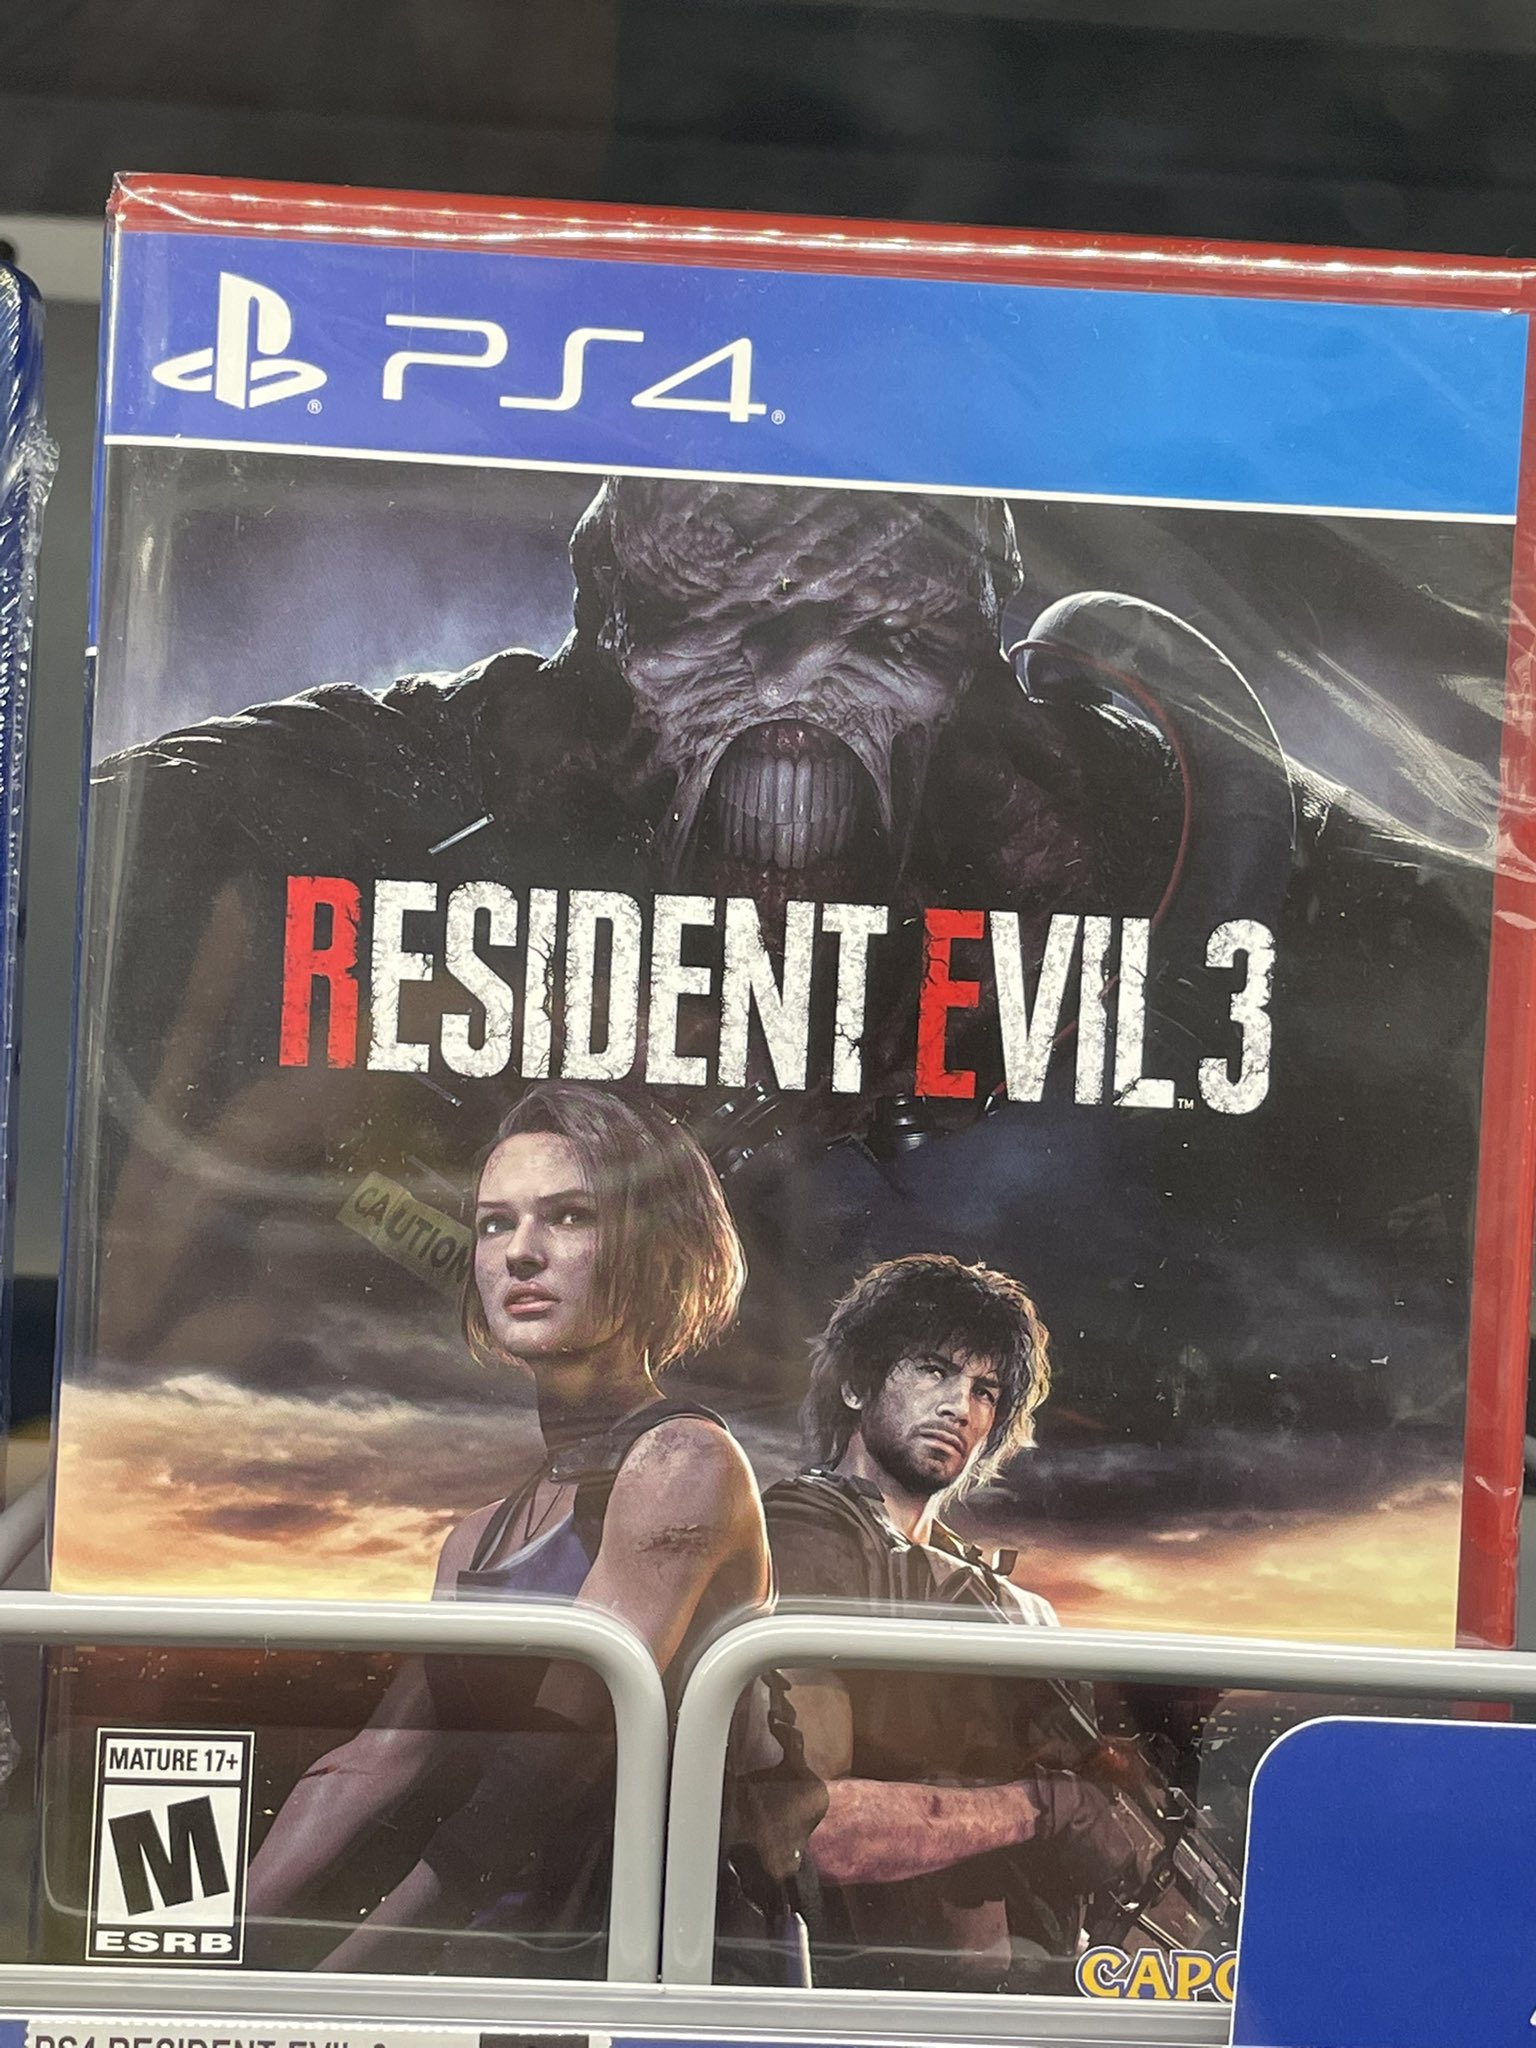 𝐑𝐮𝐥𝐞𝐓𝐢𝐦𝐞 on X: Hey guys! I saw Resident Evil 3 Remake in a red  case! Does anyone know if this is rare? 😊  / X